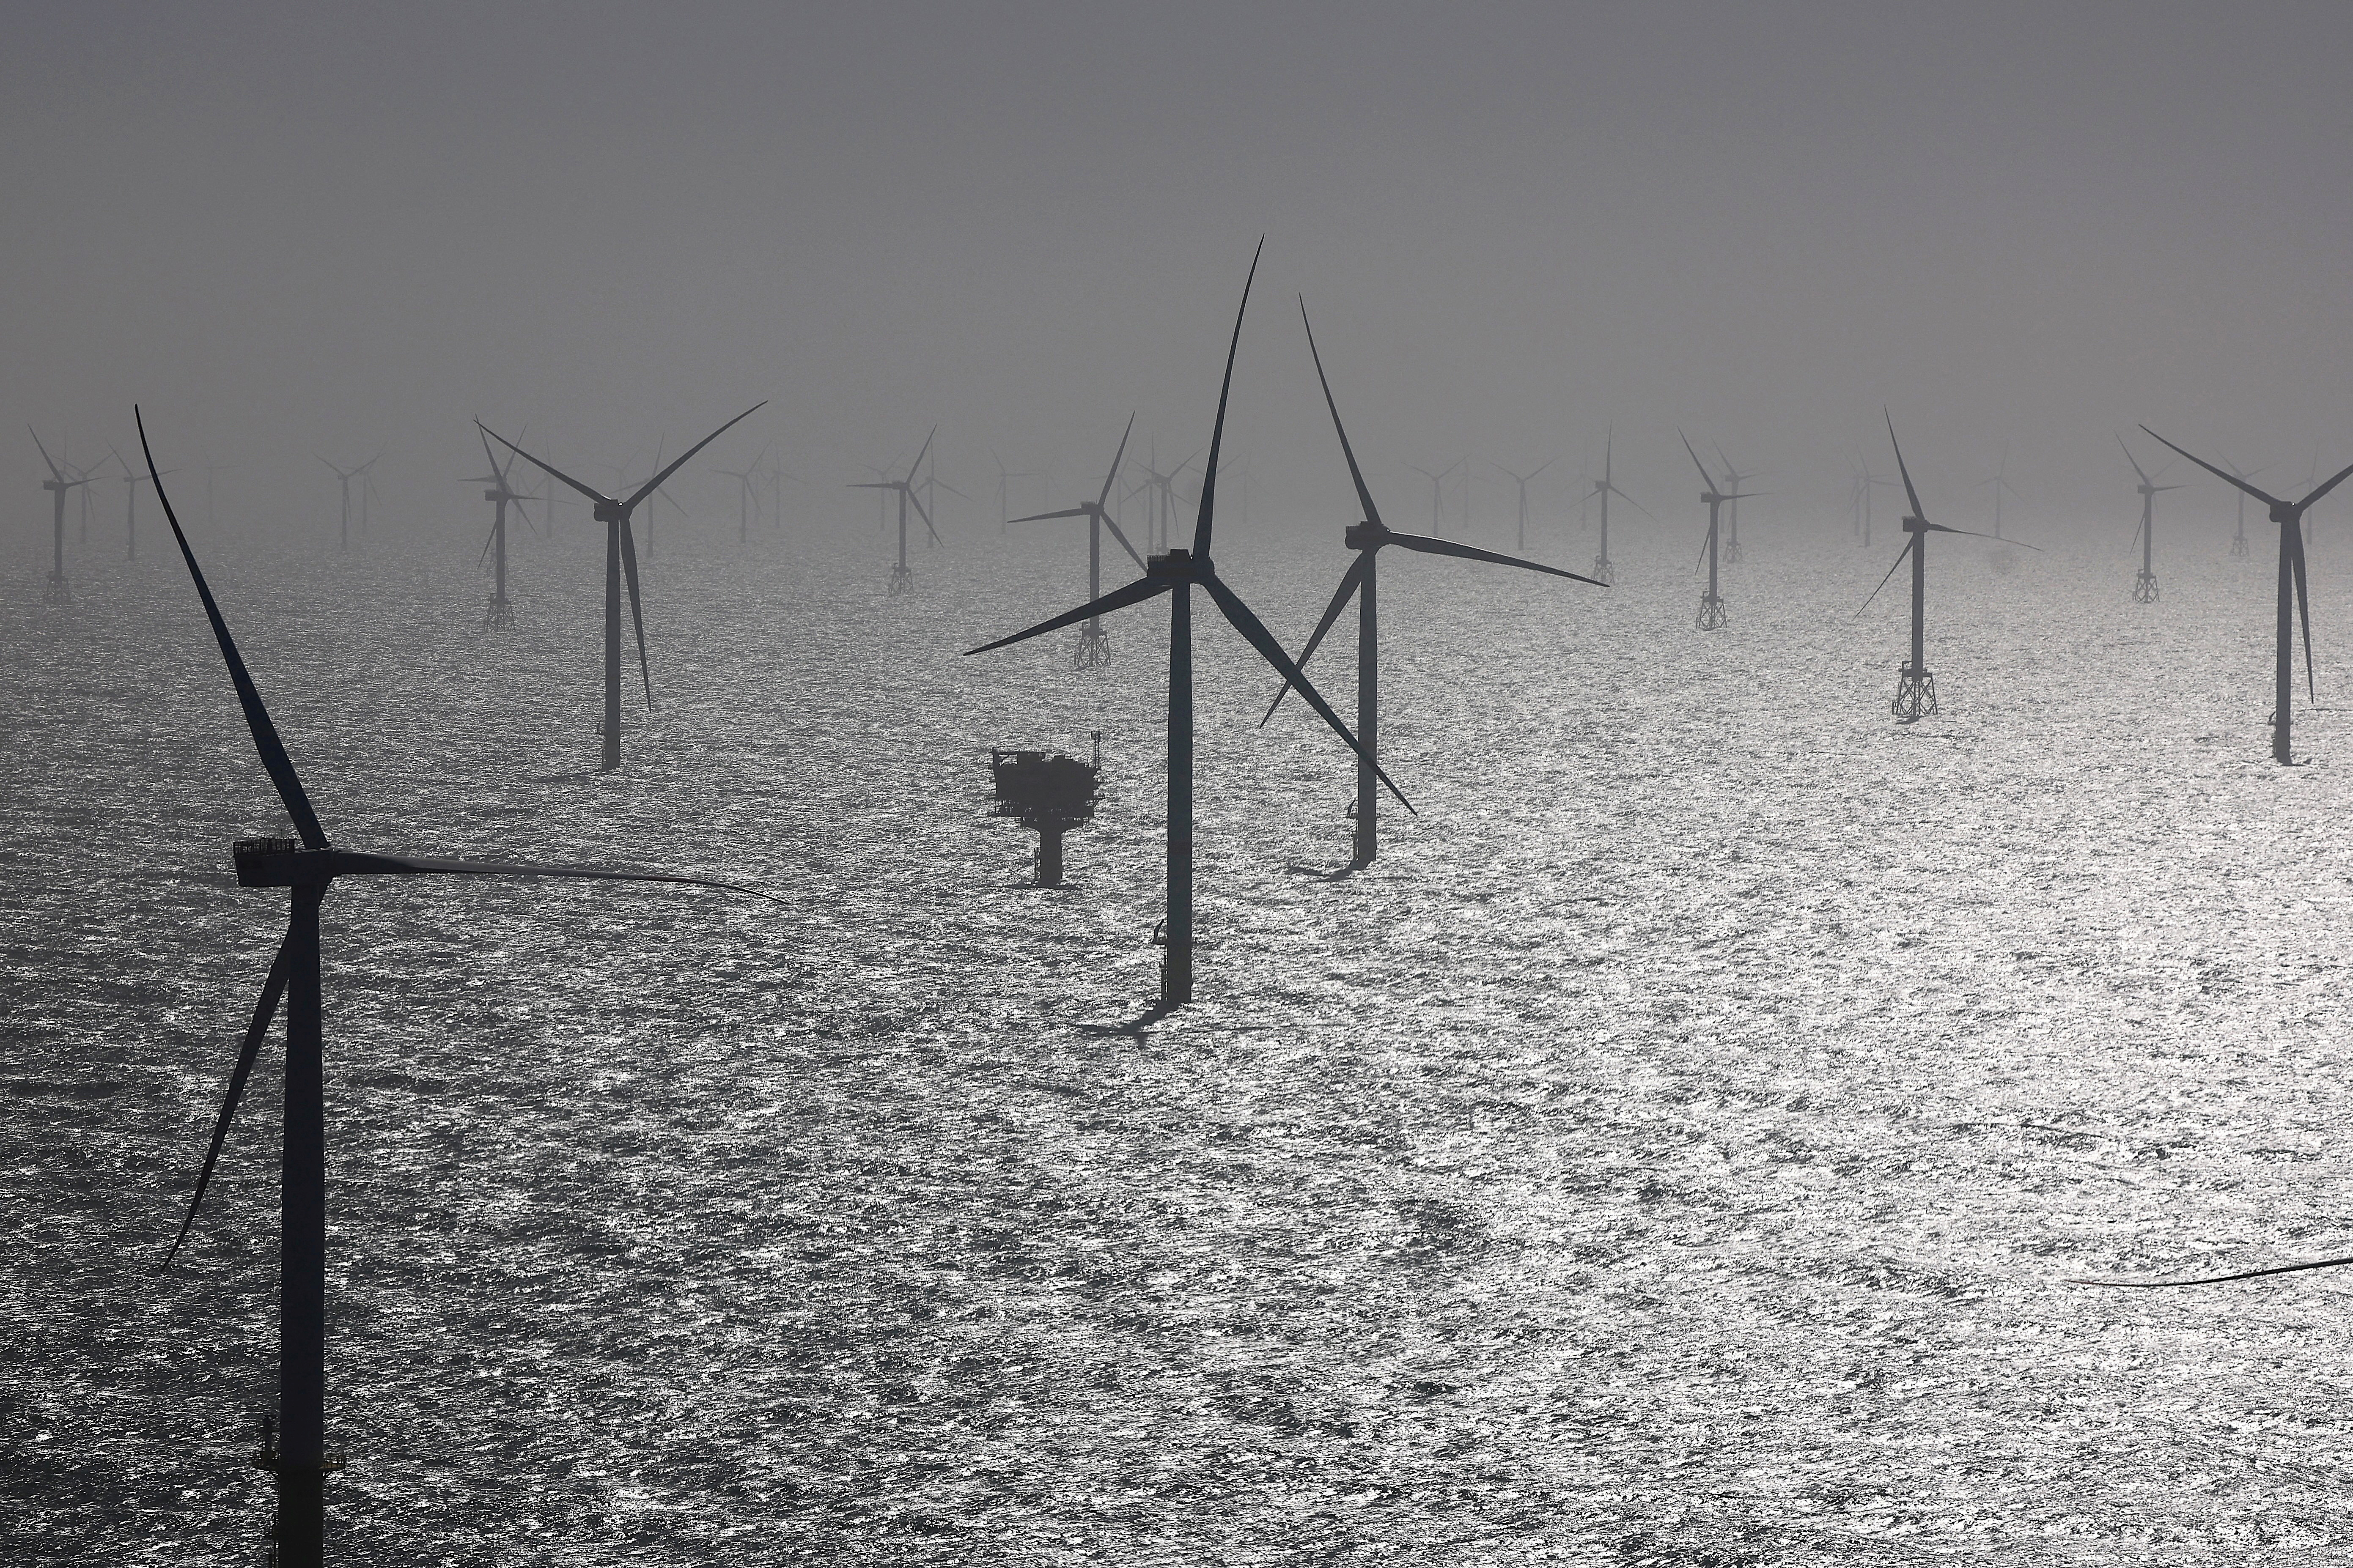 Wind energy: How are EU countries contributing to the 2030 targets?